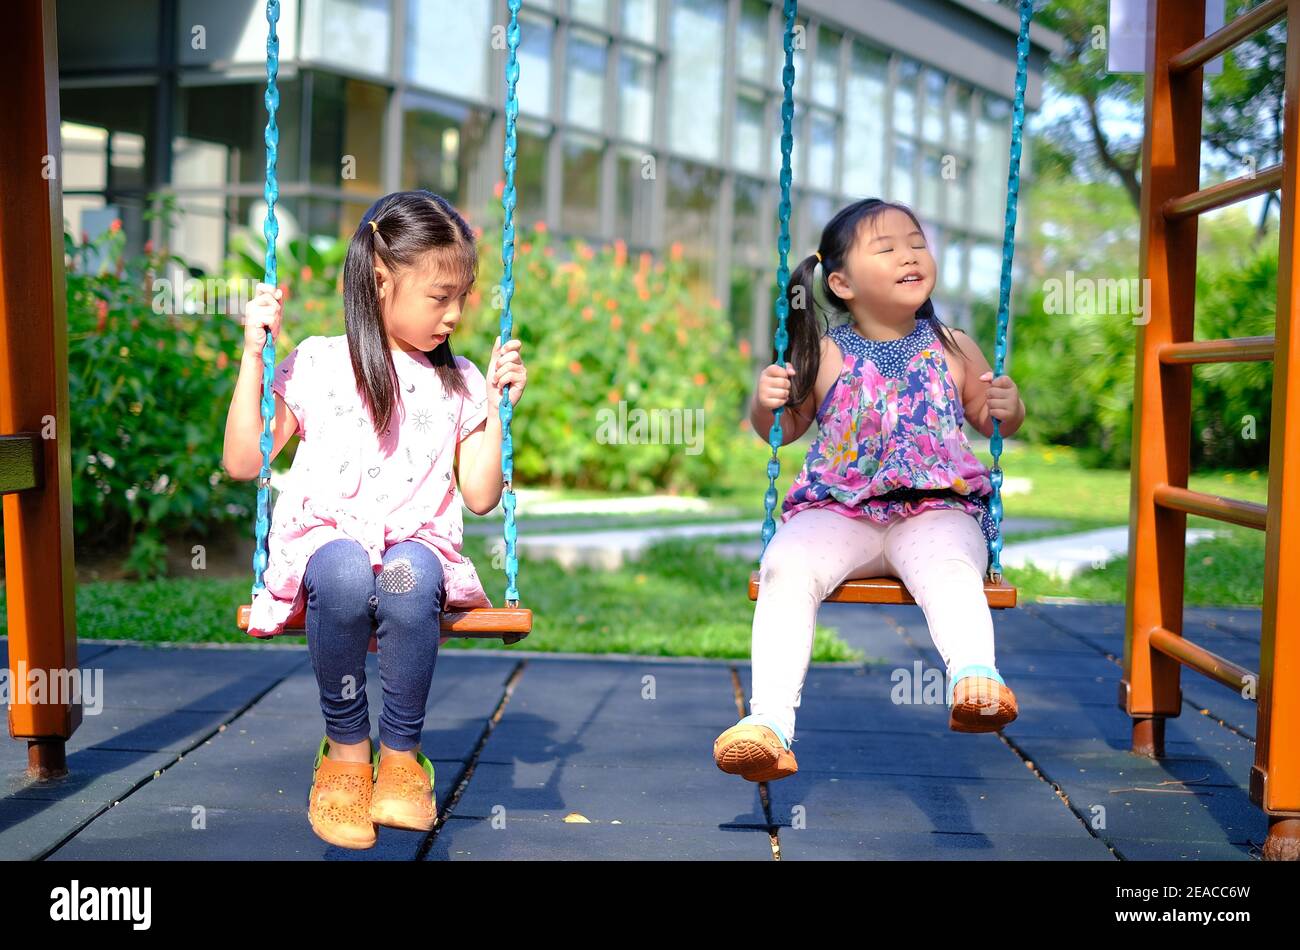 Two cute young Asian girls at a playground playing swings together, having fun outdoor and smiling on a sunny day. Stock Photo